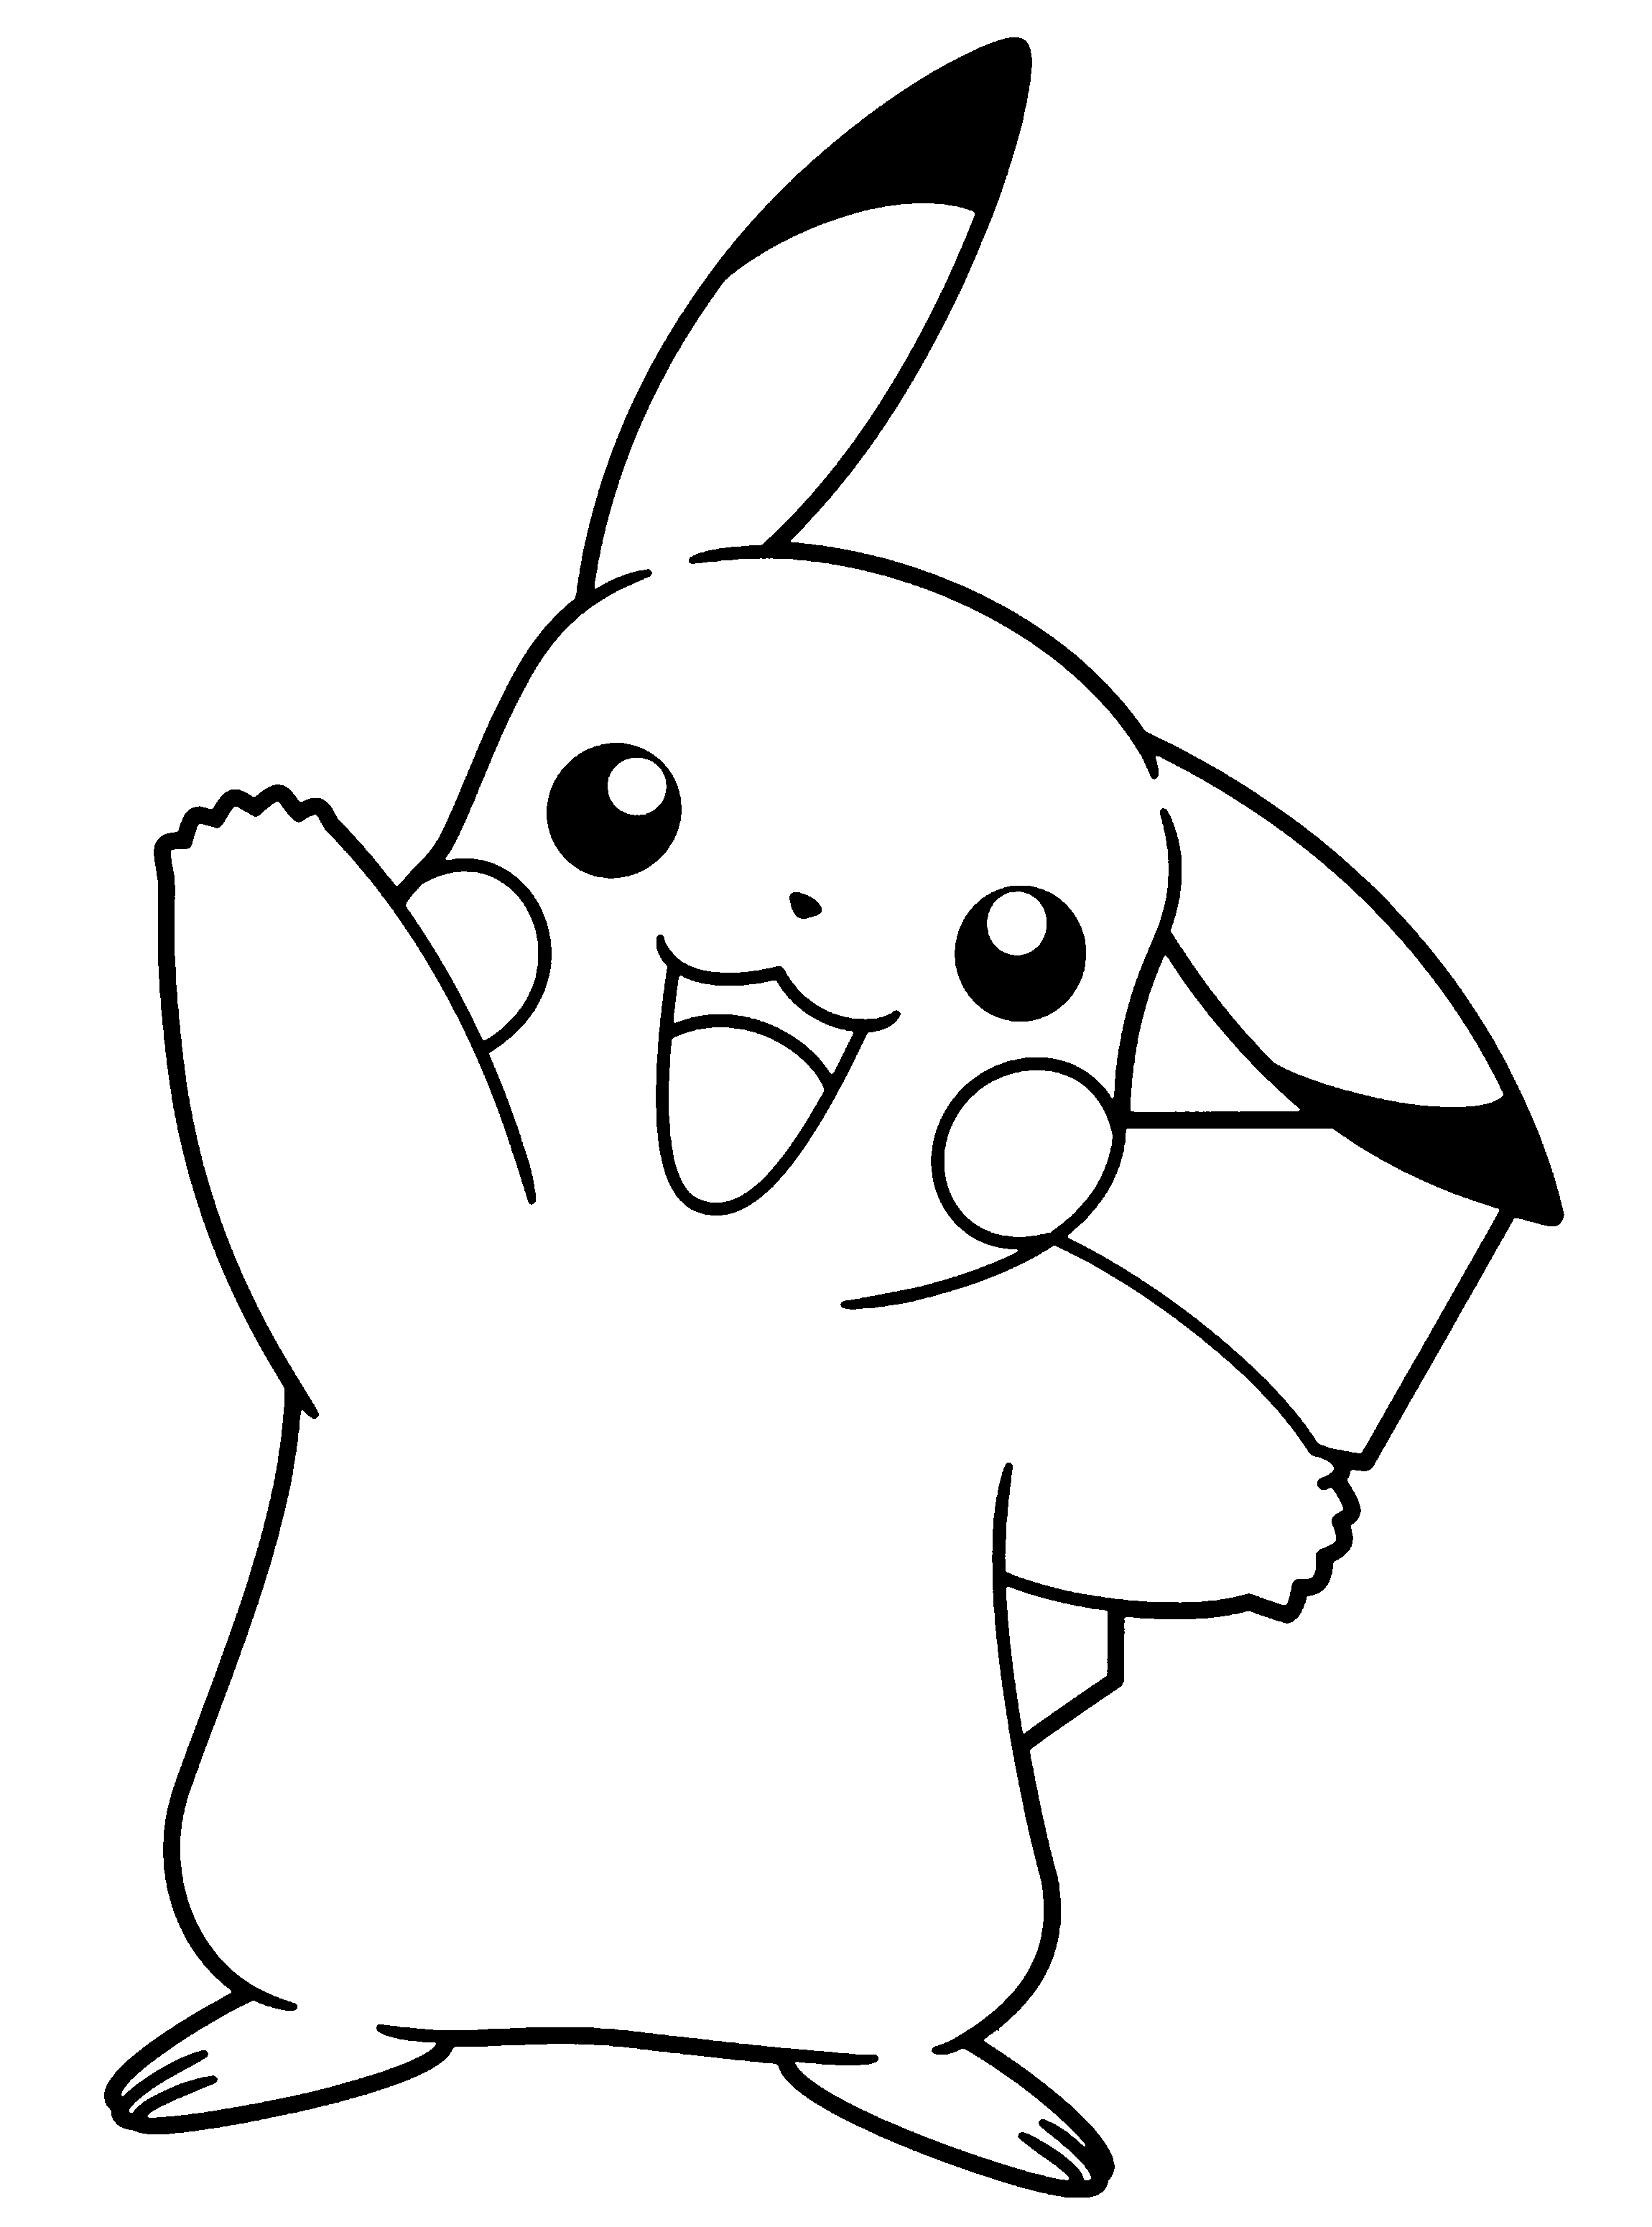 free online coloring pages pokemon black white pokemon black and white printable coloring pages gtgt disney pages black pokemon online free white coloring 